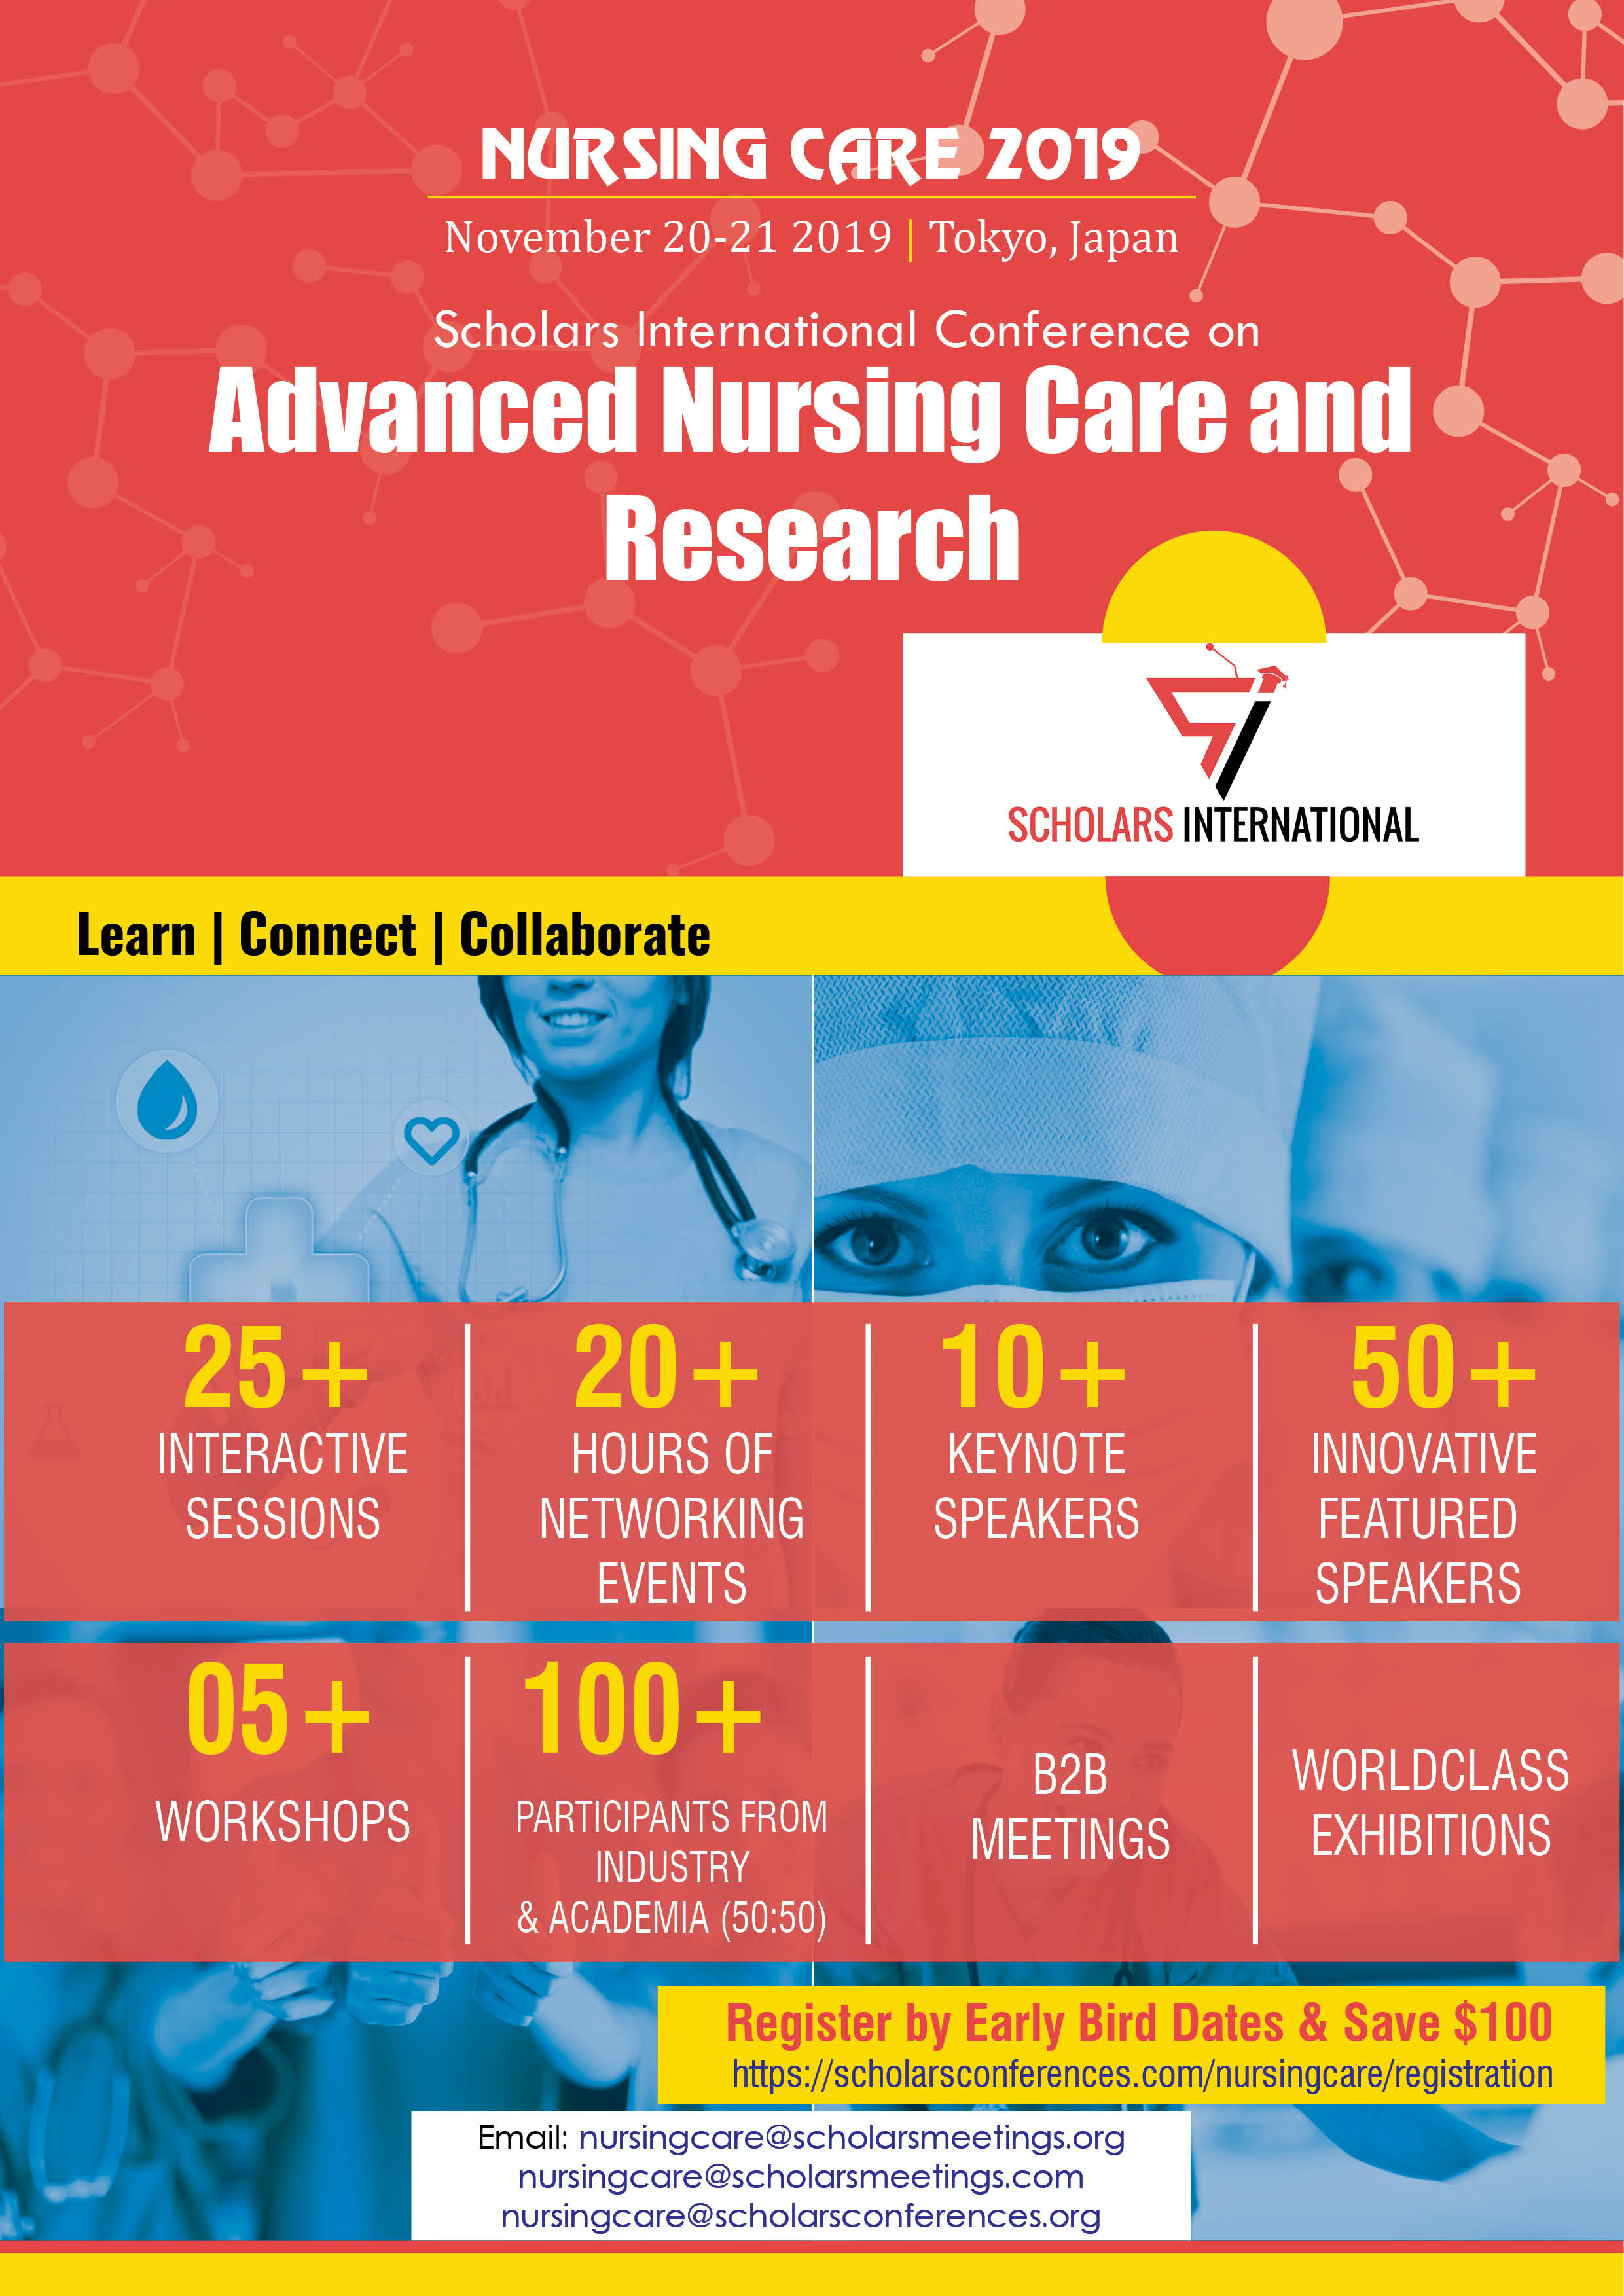 Scholars International Conference on Advanced Nursing Care and Research, Tokyo, Japan